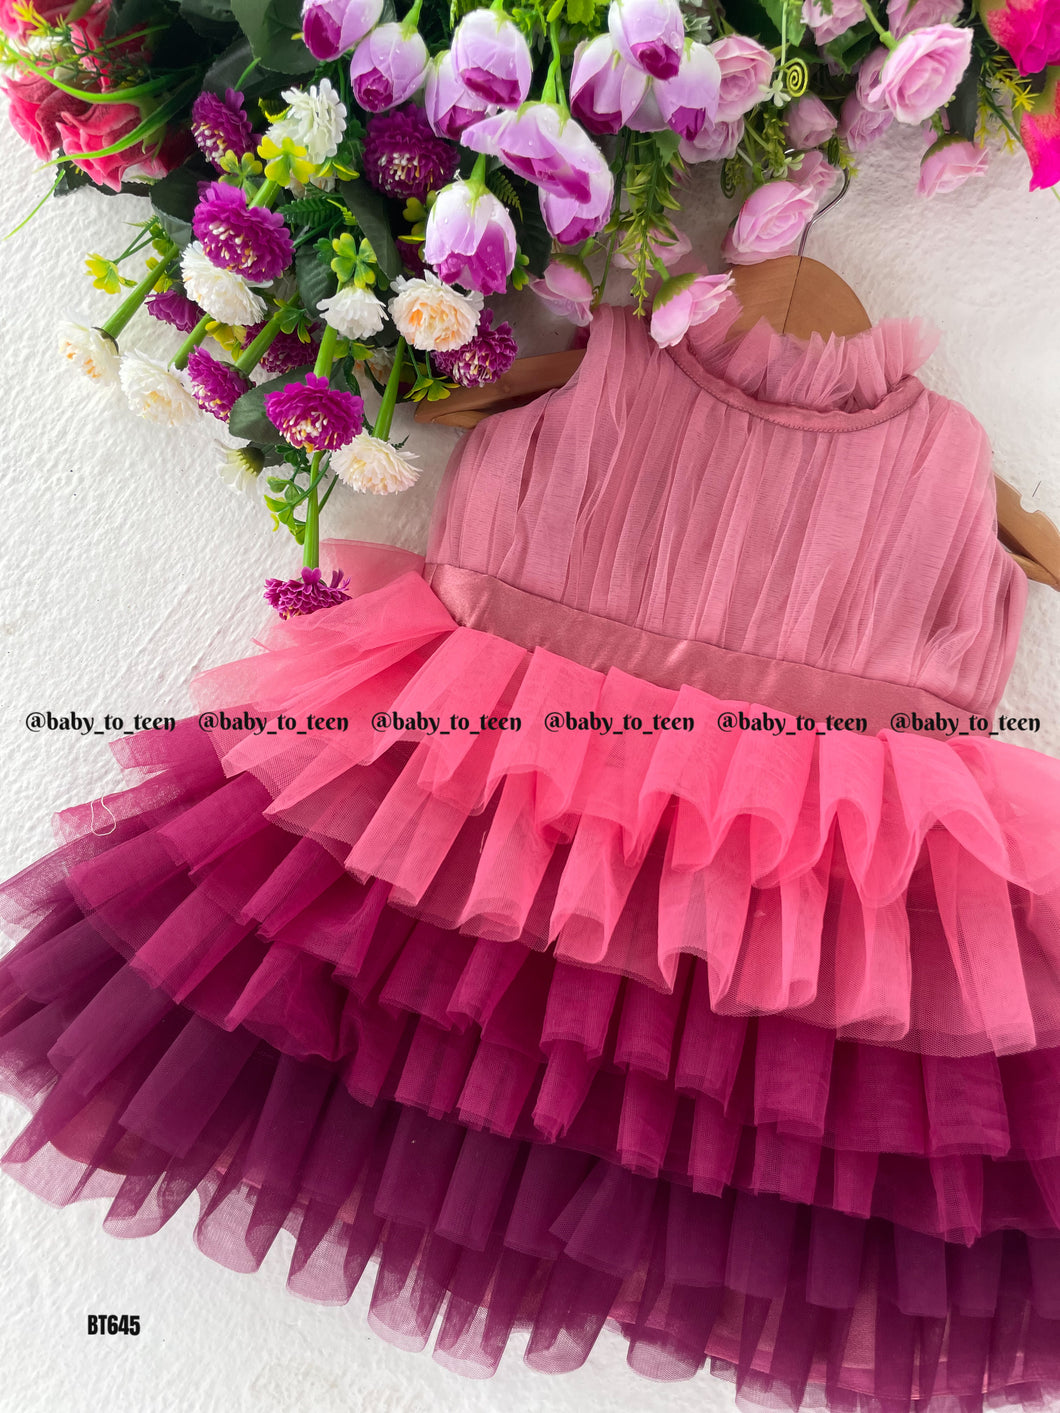 BT645 Blushing Bloom: Pink Layered Party Dress - Unforgettable Moments Await